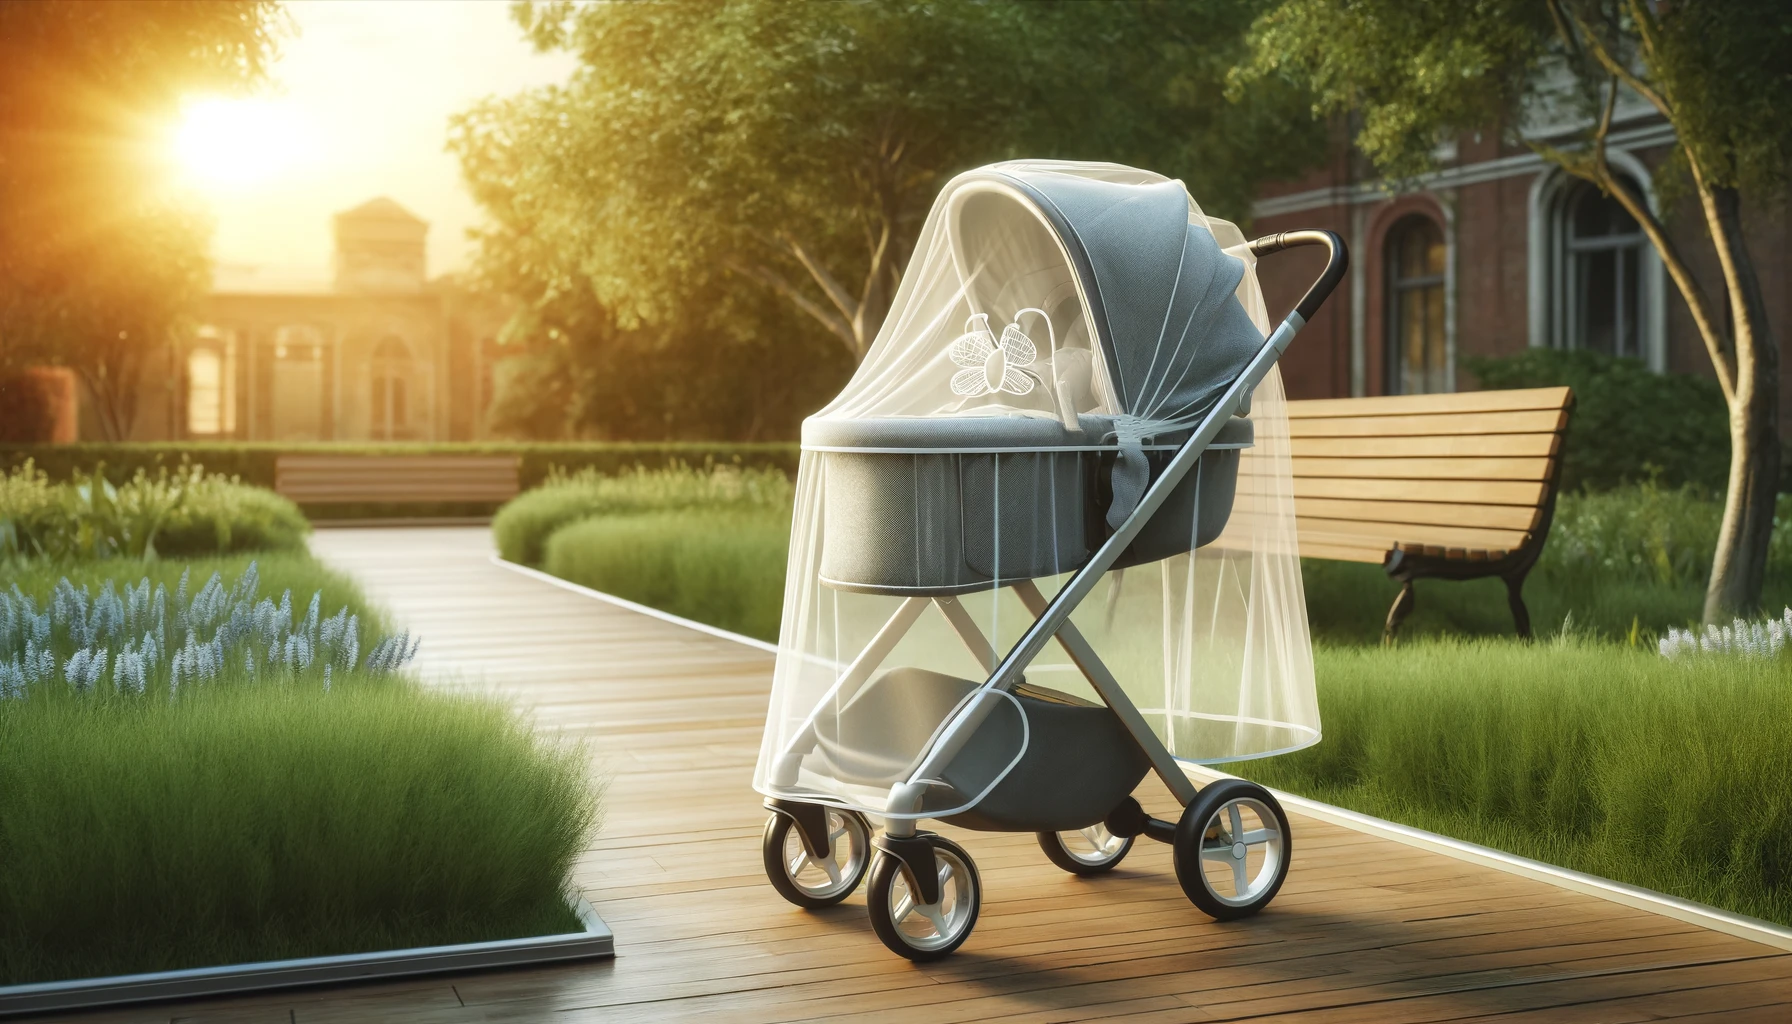 An image showcasing a stroller equipped with a mosquito net cover to protect a baby from insects. The scene features a modern stroller outdoors, possibly in a park or garden, where the risk of insect bites is higher. The mosquito net cover is fine-meshed and envelops the stroller, allowing for visibility and ventilation while effectively keeping mosquitoes and other insects out. The design of the net is practical and fits snugly over the stroller, emphasizing the safety and comfort it provides to the baby inside. The setting emphasizes a peaceful outdoor environment, showcasing the net's utility in allowing families to enjoy their time outside without concern for insect bites.